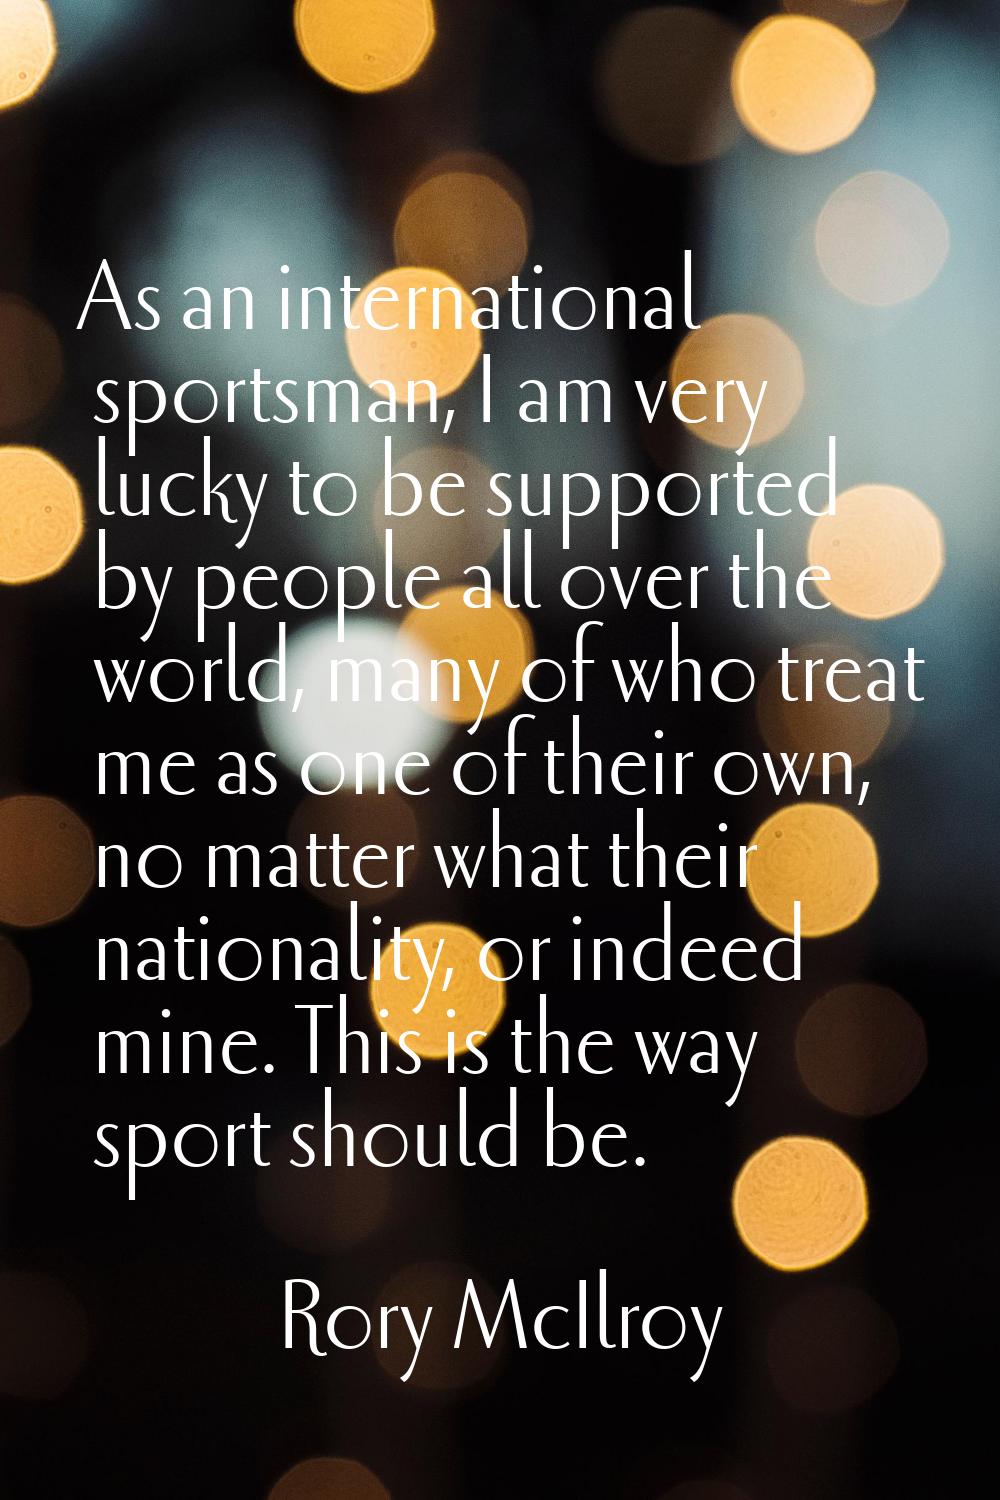 As an international sportsman, I am very lucky to be supported by people all over the world, many o